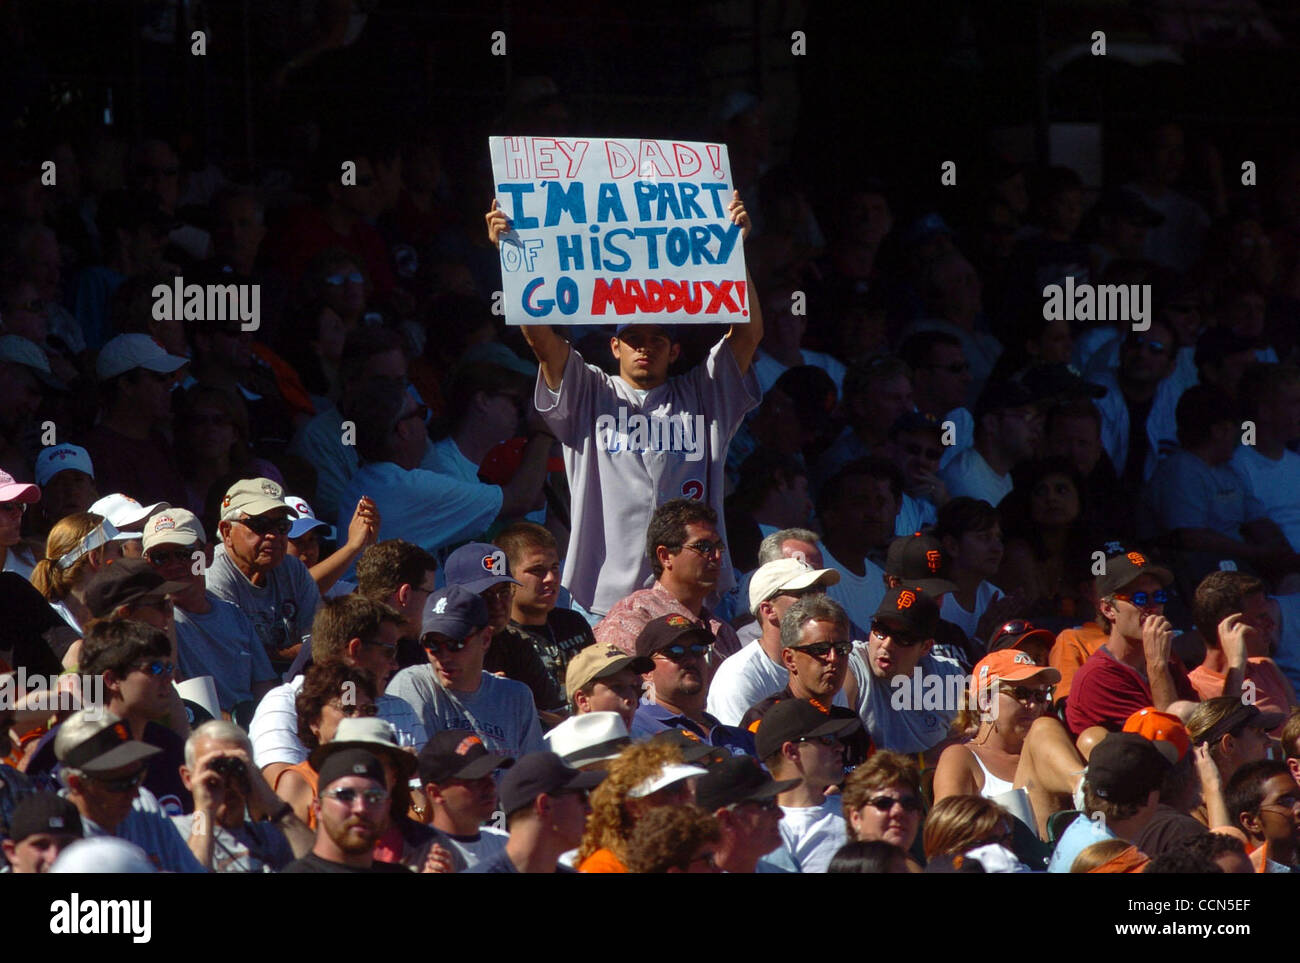 A Chicago Cubs fan shows his support for Cubs pitcher Greg Maddux after winning his 300th win on Saturday, August 7, 2004 at SBC Park in San Francisco, Calif. Chicago beat San Francisco 8-4. (Jose Carlos Fajardo/Contra Costa Times) Stock Photo